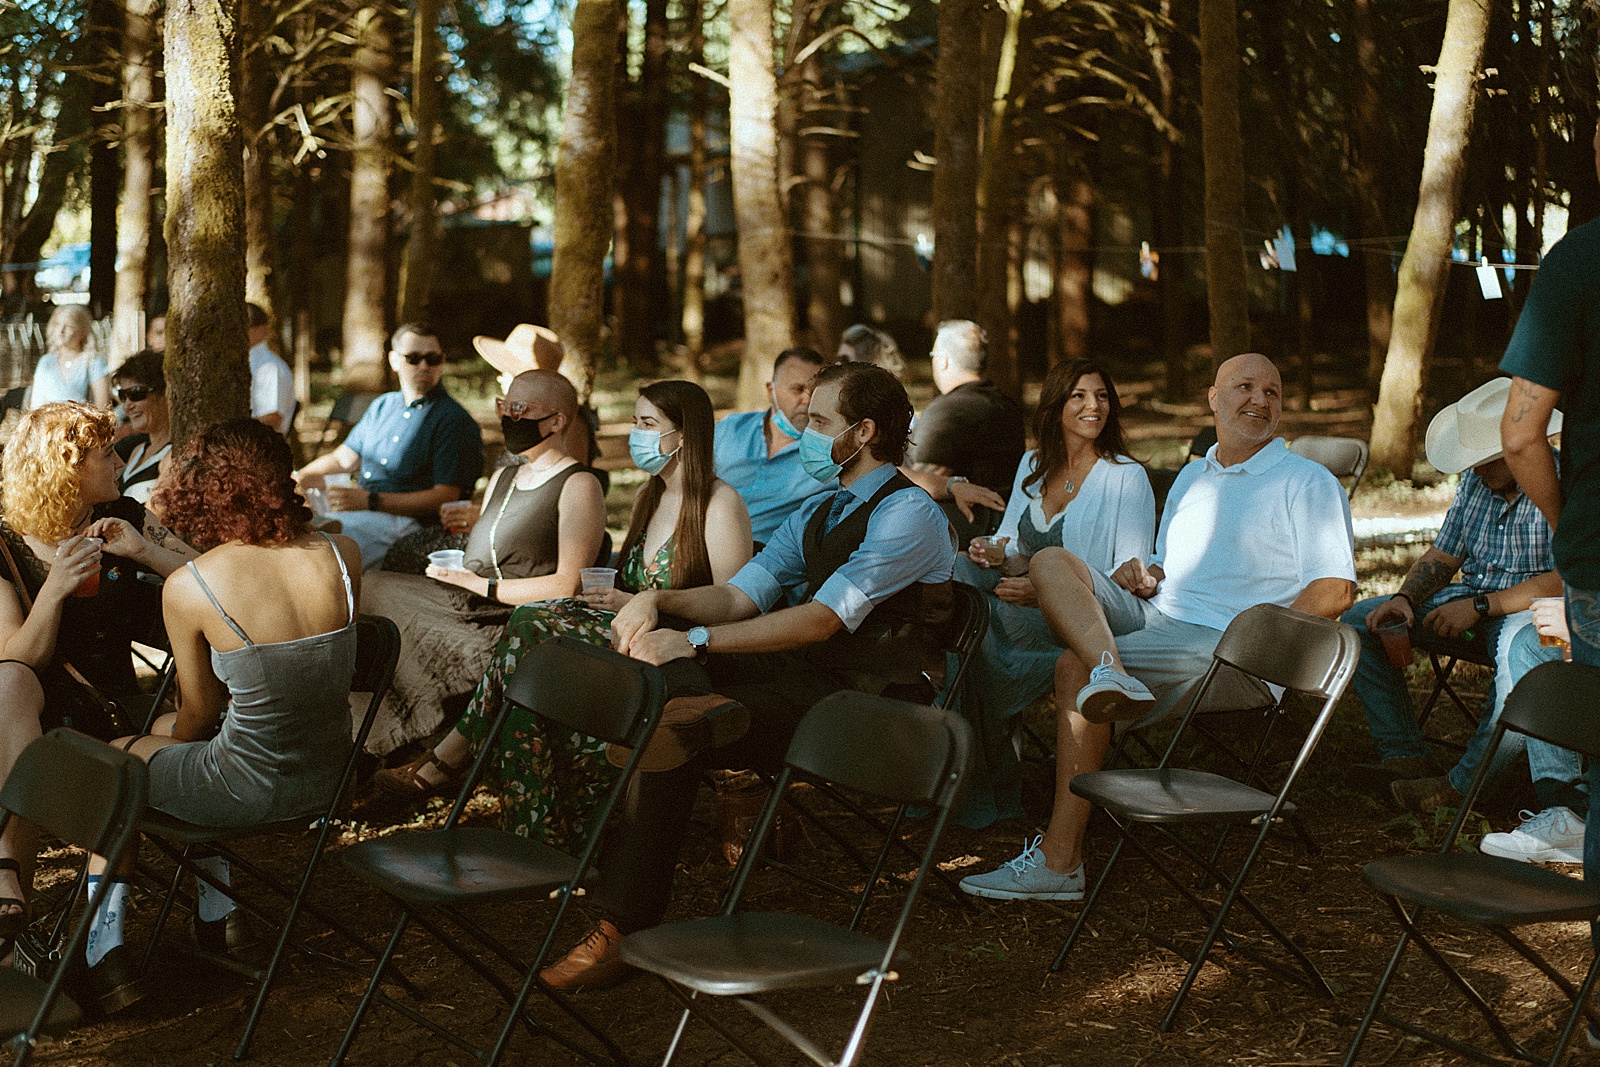 Guests watching Bride and groom at alter in Oregon forest wedding by Danielle Johnson Photography